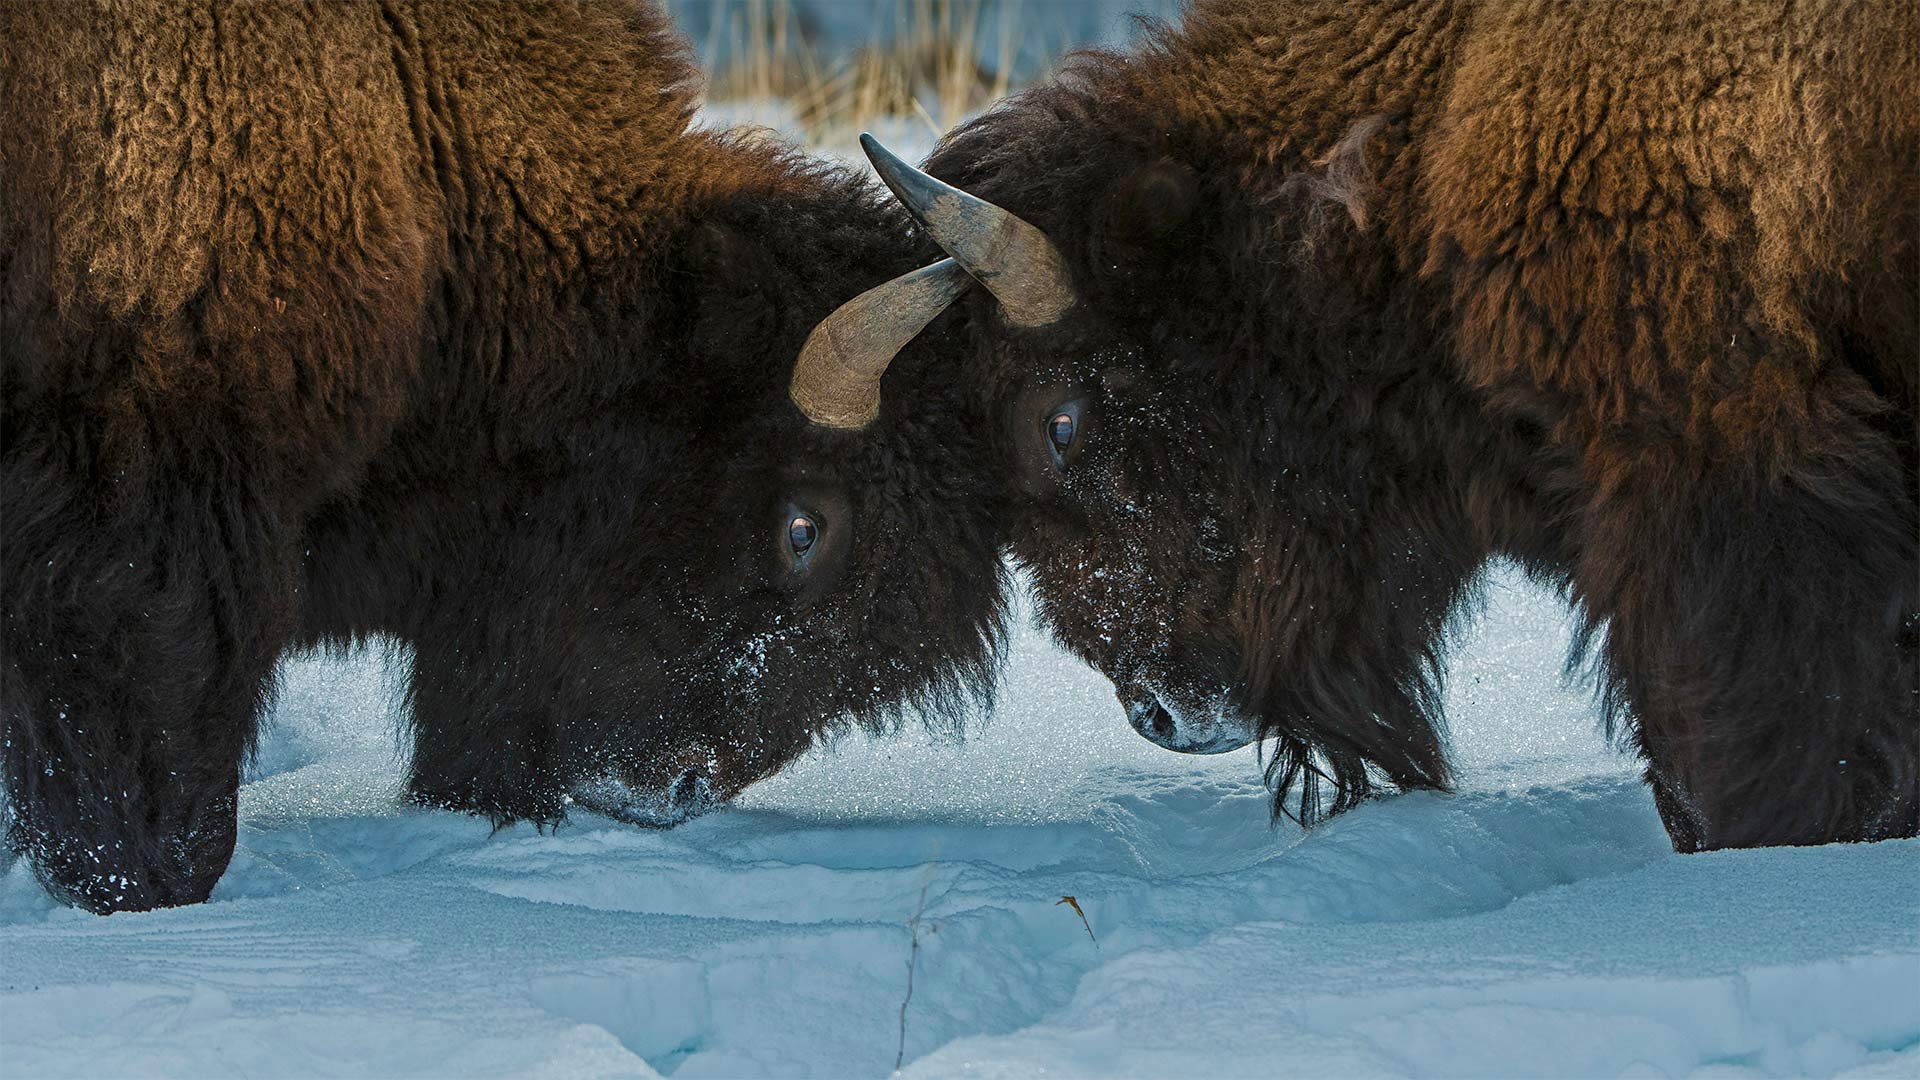 American bison in Yellowstone National Park, Wyoming - Gerald Corsi/Getty Images)